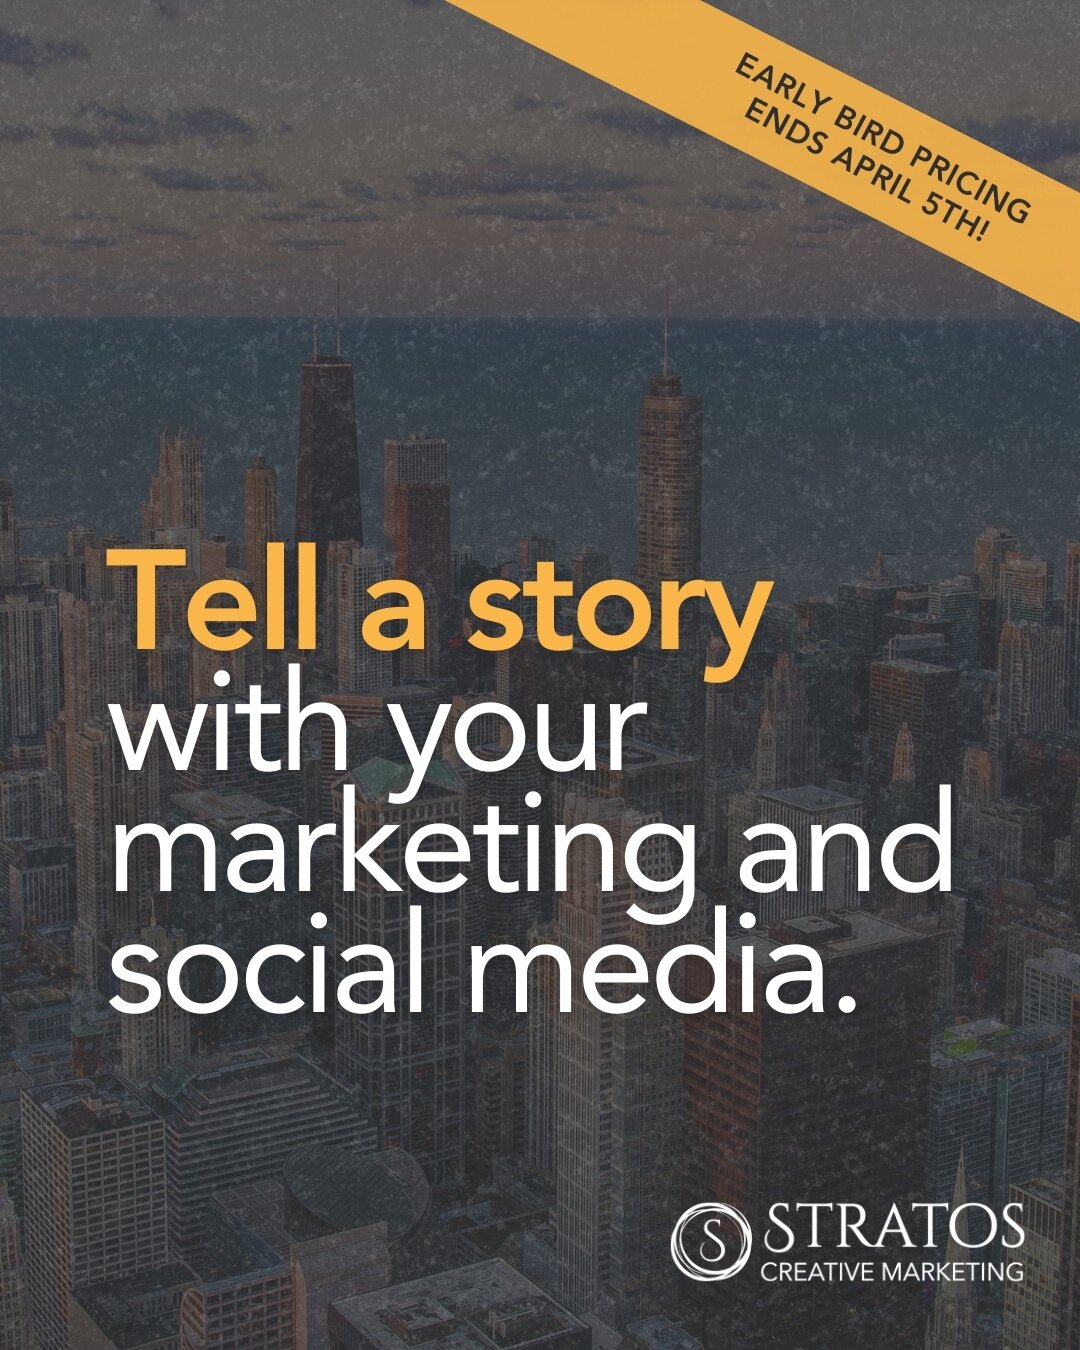 A well-crafted business story is powerful. Your customers become your sales force. Your revenue increases. You&rsquo;ll connect with your audience in your marketing.

Is your marketing doing that? If not, let&rsquo;s make it happen.

On May 8-9, our 